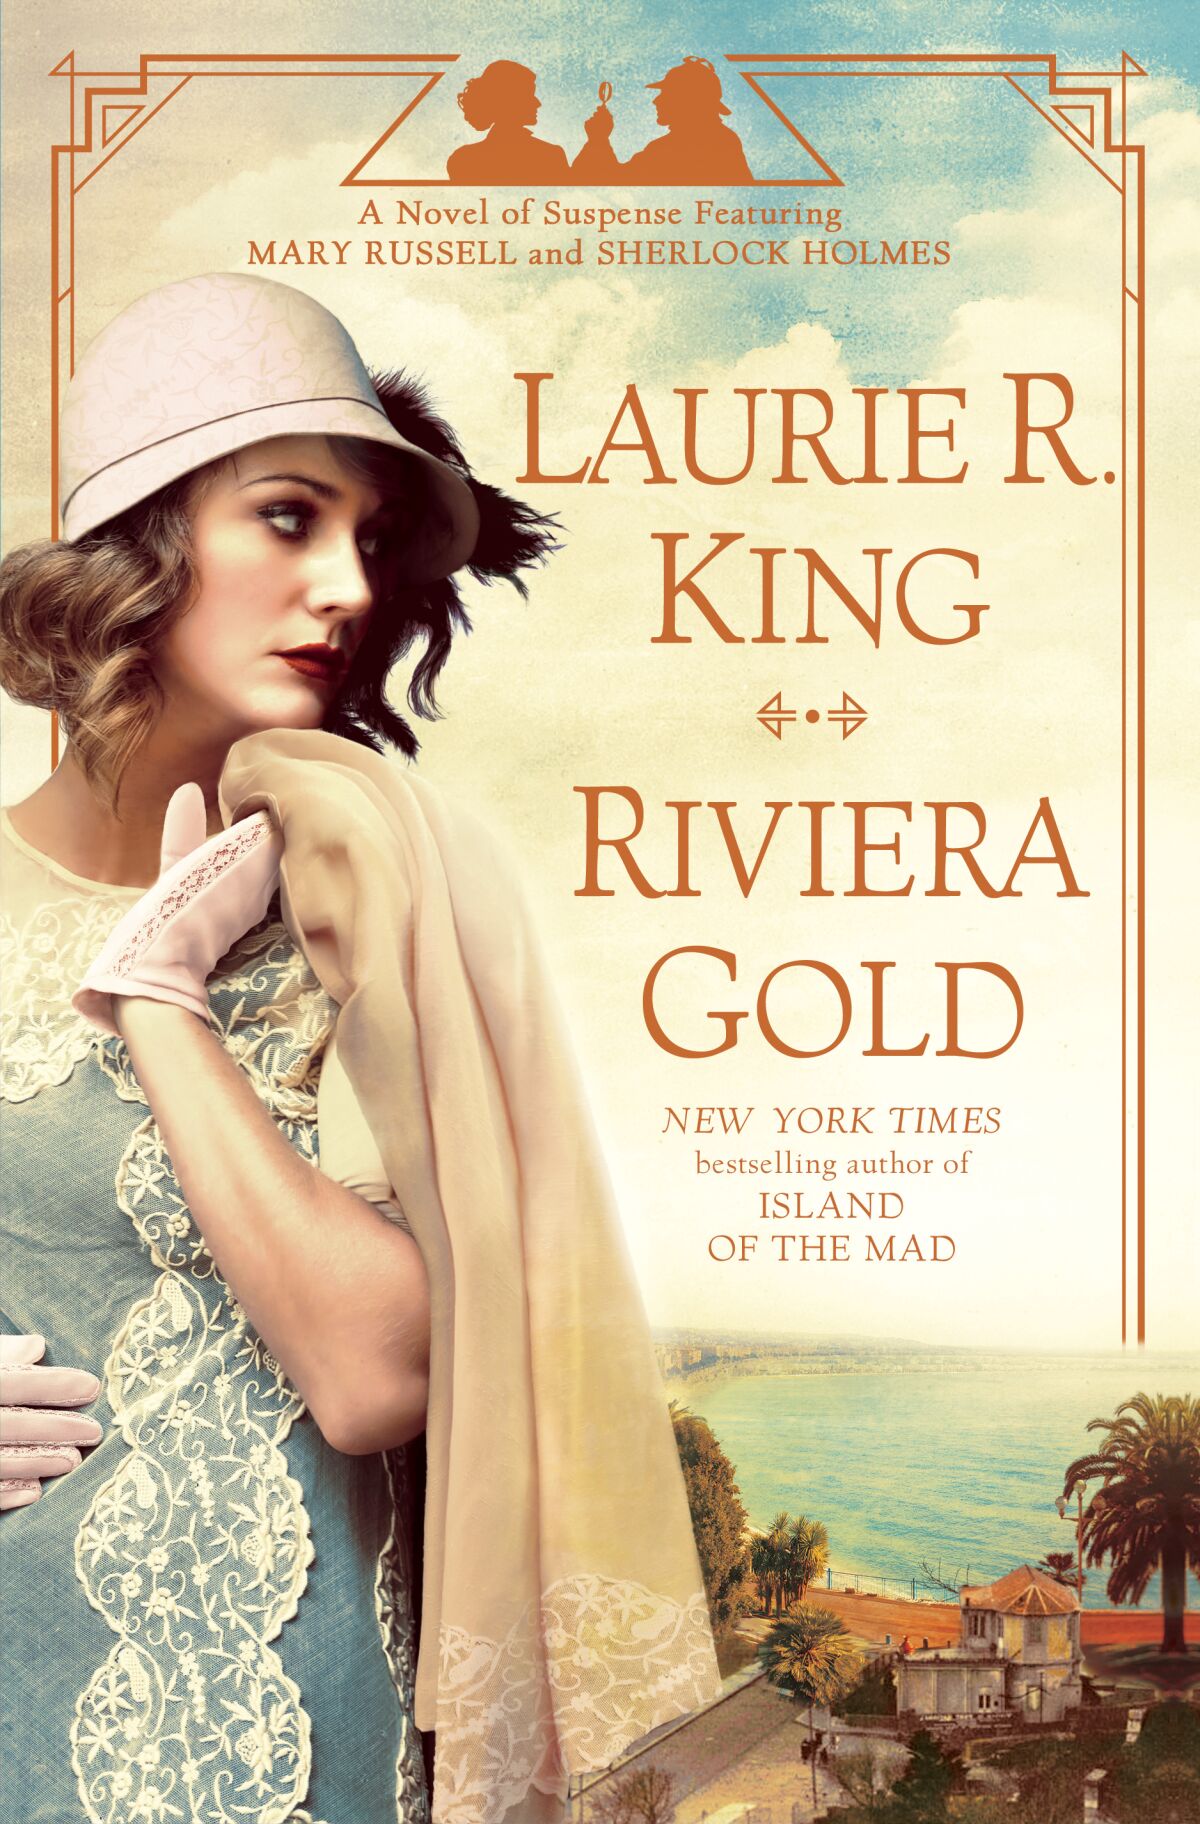 A book jacket for Laurie R. King's "Riviera Gold."